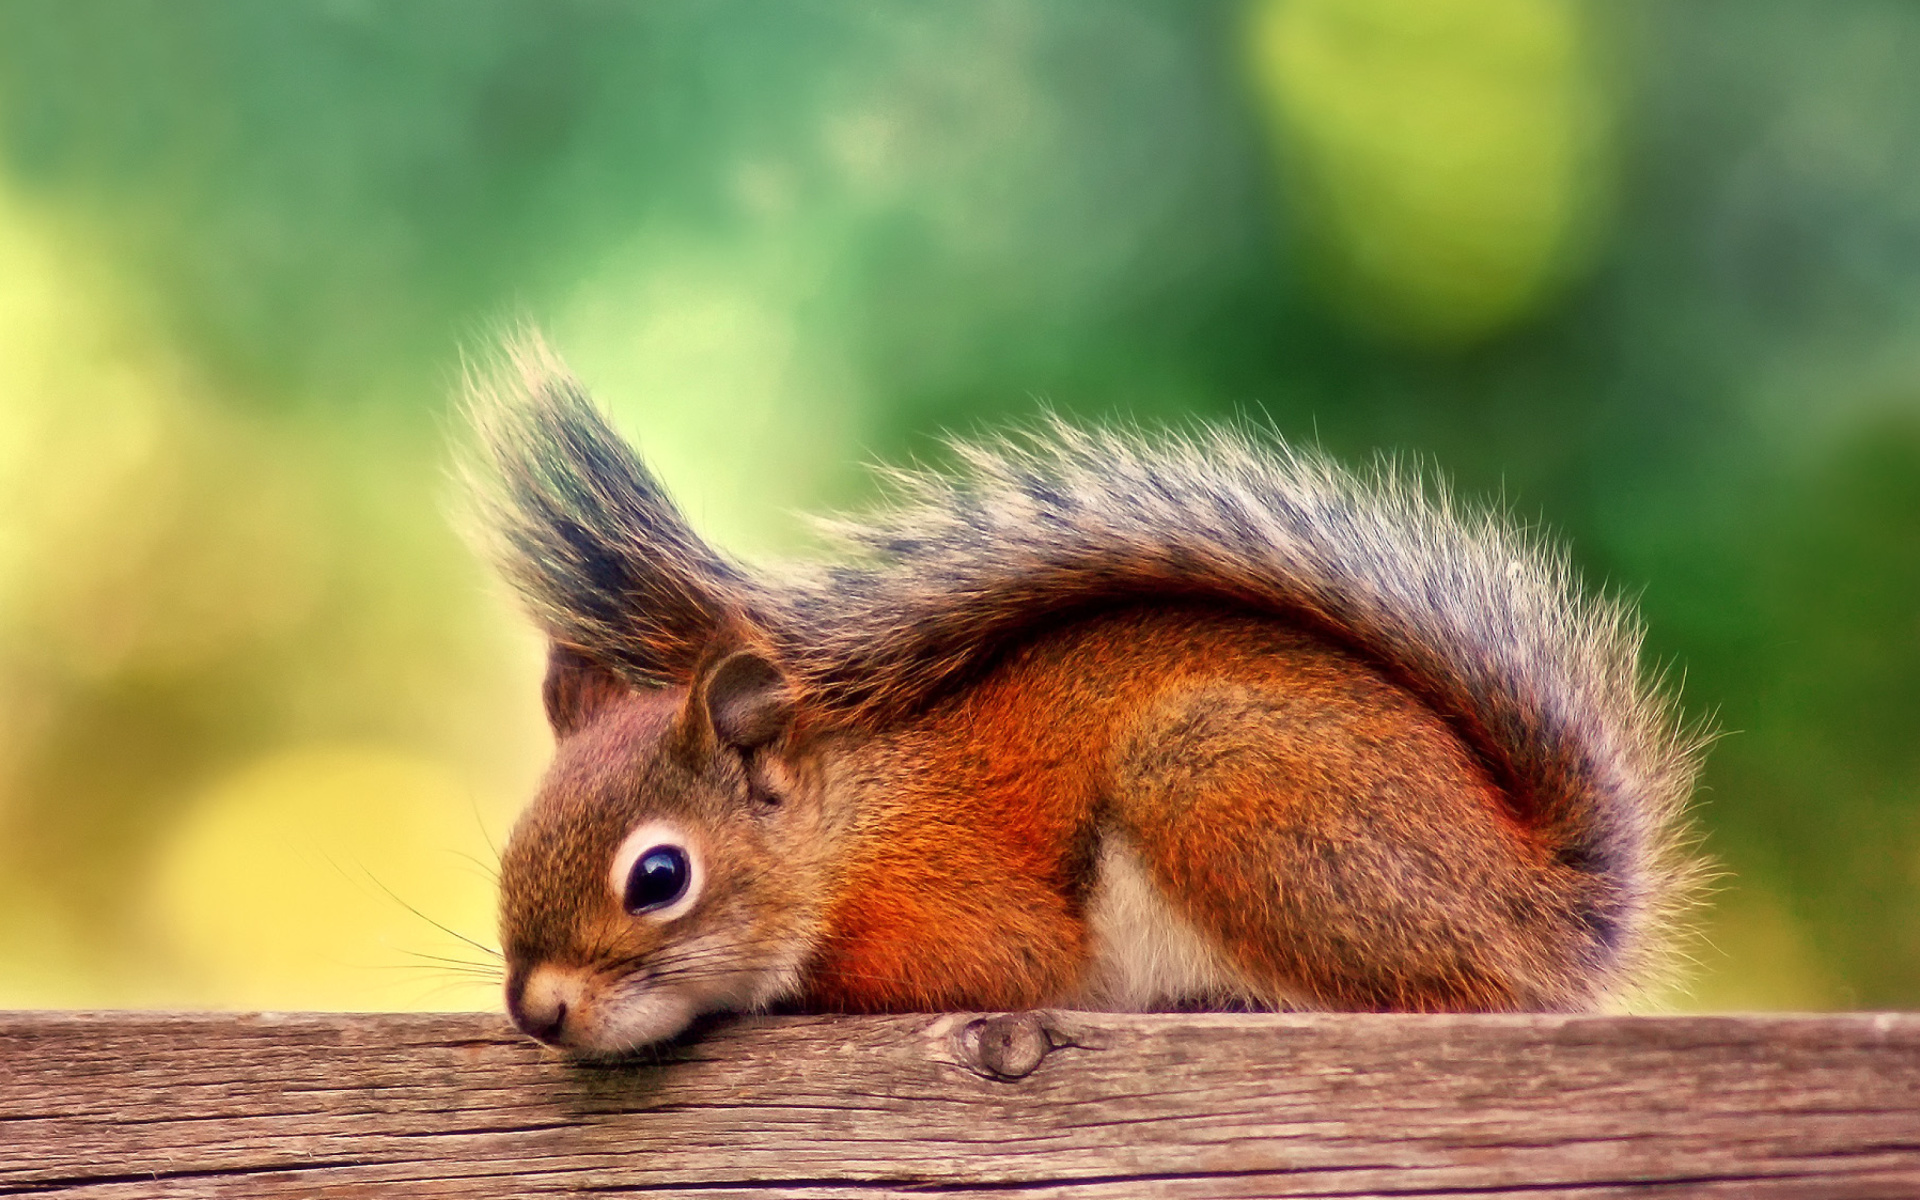 American red squirrel wallpaper 1920x1200